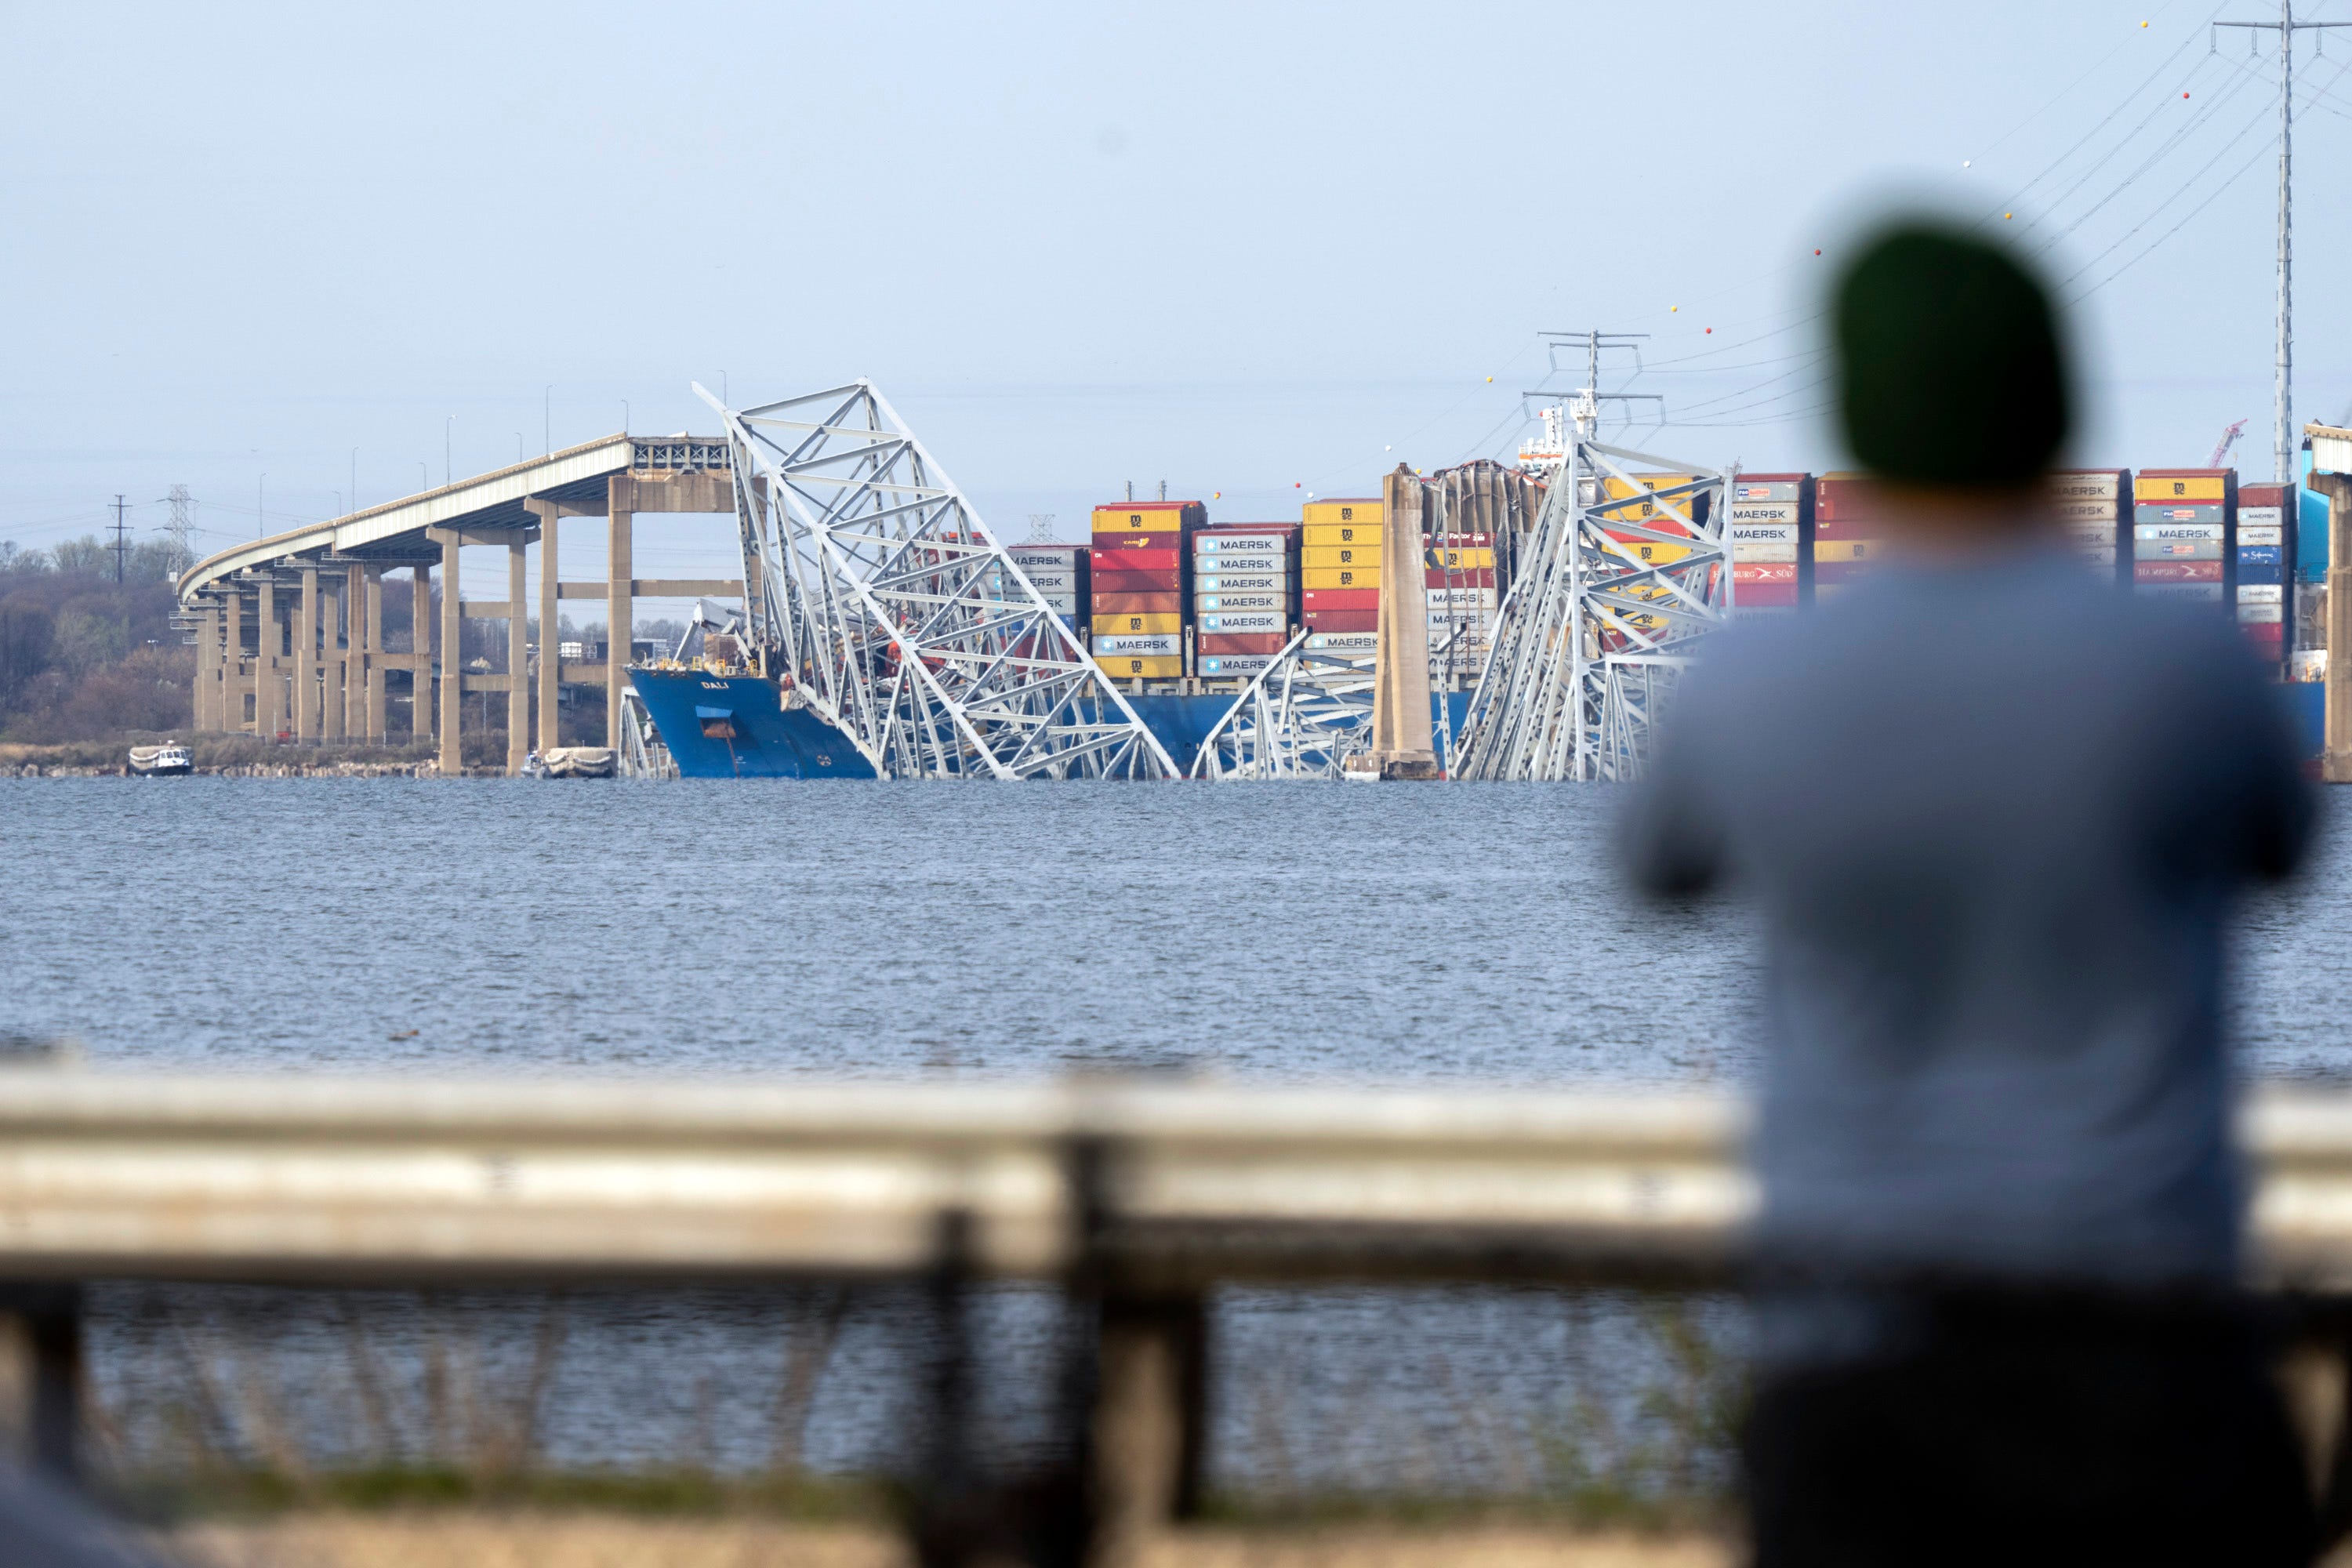 dali ship that wrecked baltimore bridge was 'unseaworthy' before it left port, city claims